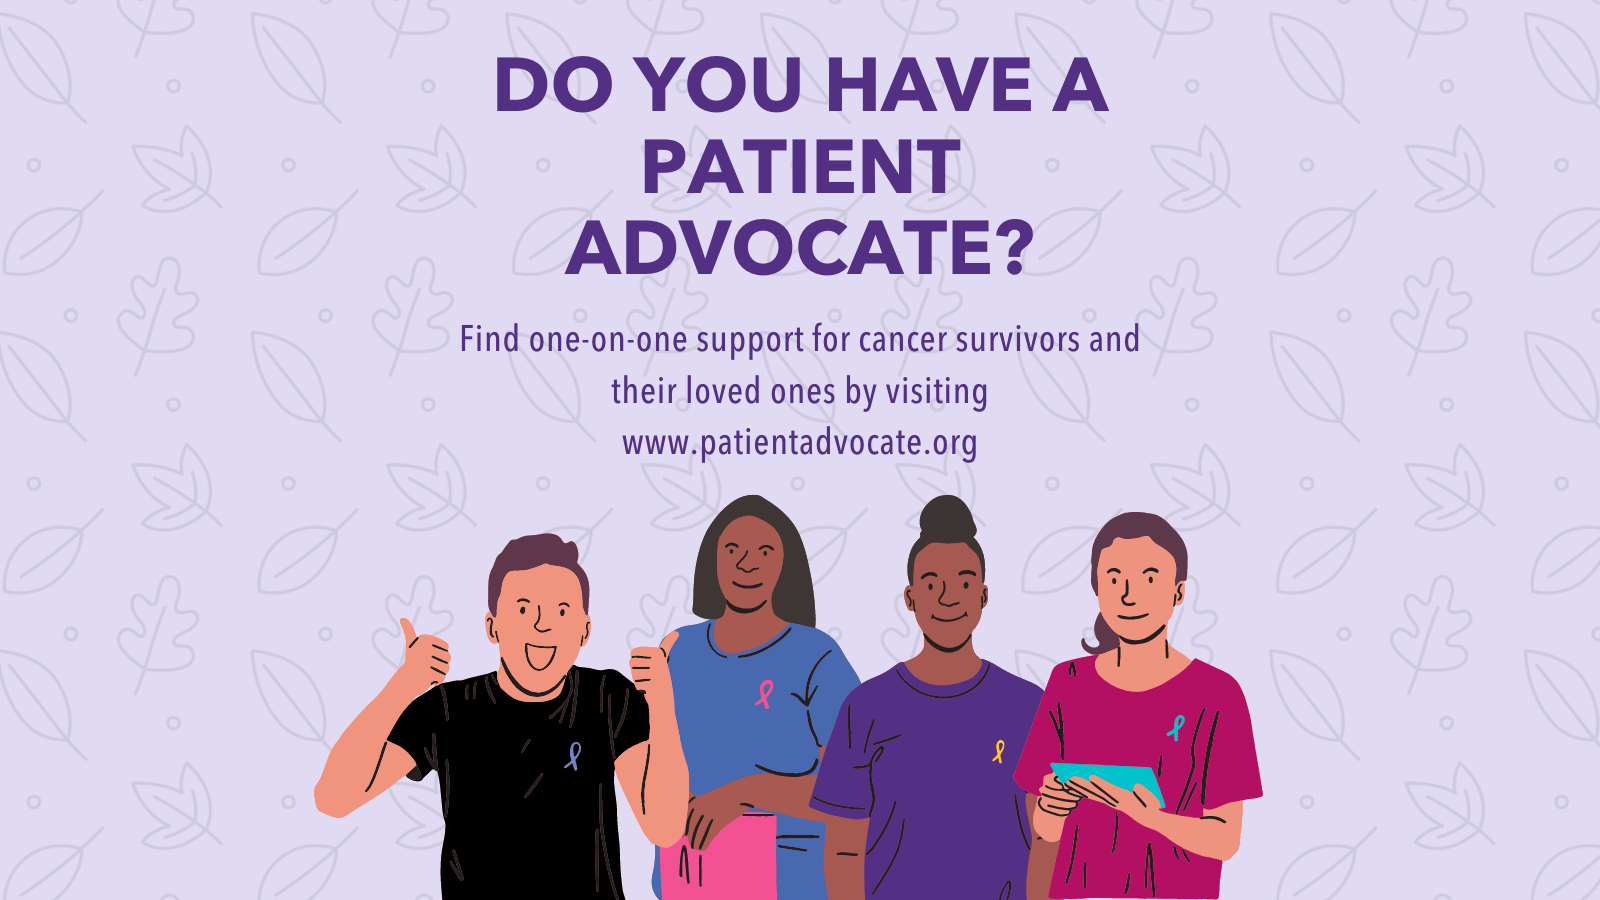 Image of a group of patient advocates wearing different colored cancer ribbons. Text above states: Do you have a patient advocate? Find one on one support for cancer survivors and their loved ones by visiting www.patientadvocate.org